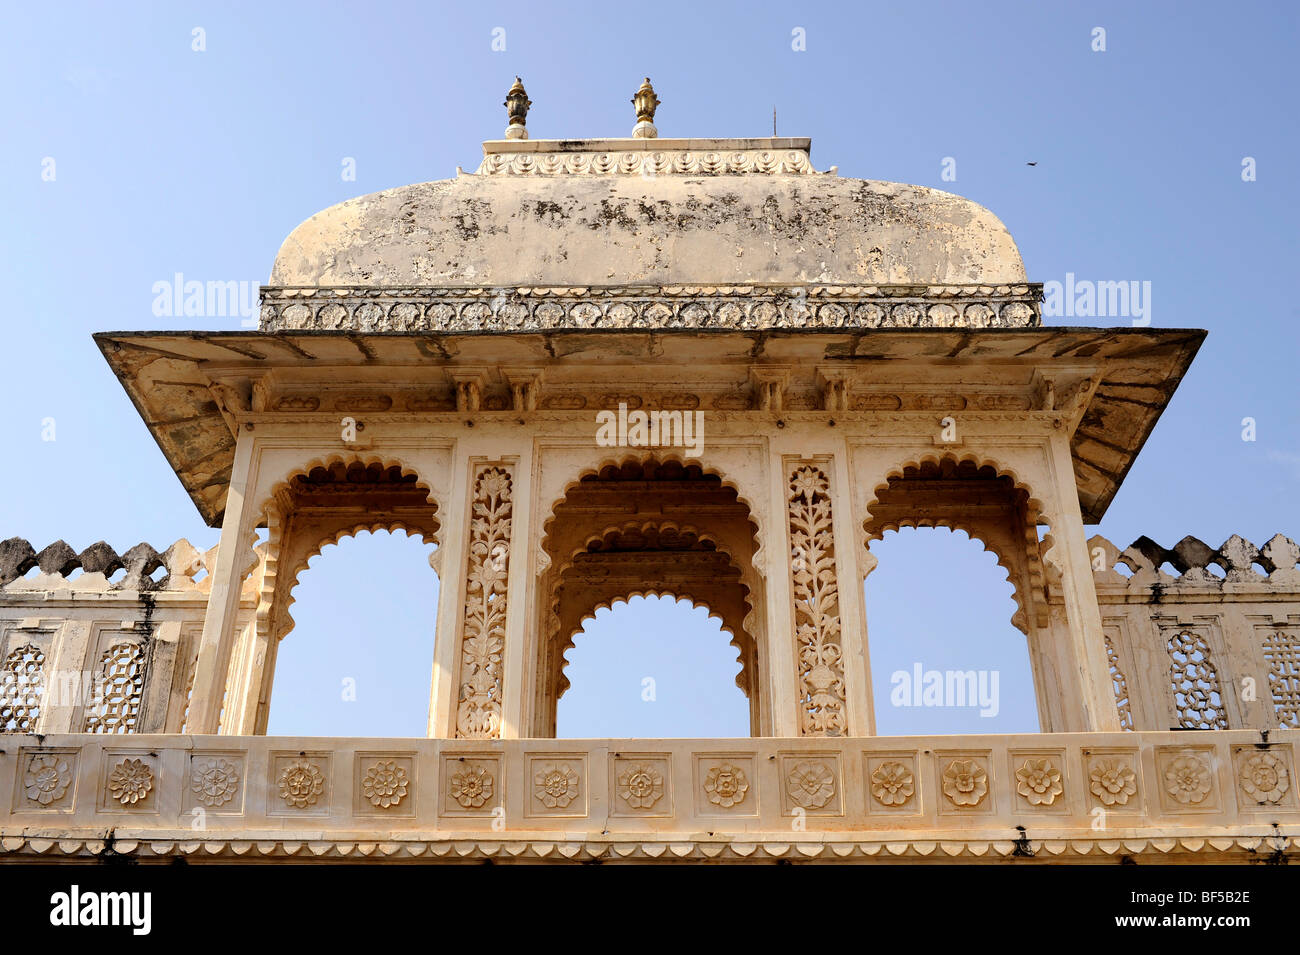 City palace of Udaipur, detail, Udaipur, Rajasthan, North India, India, South Asia, Asia Stock Photo